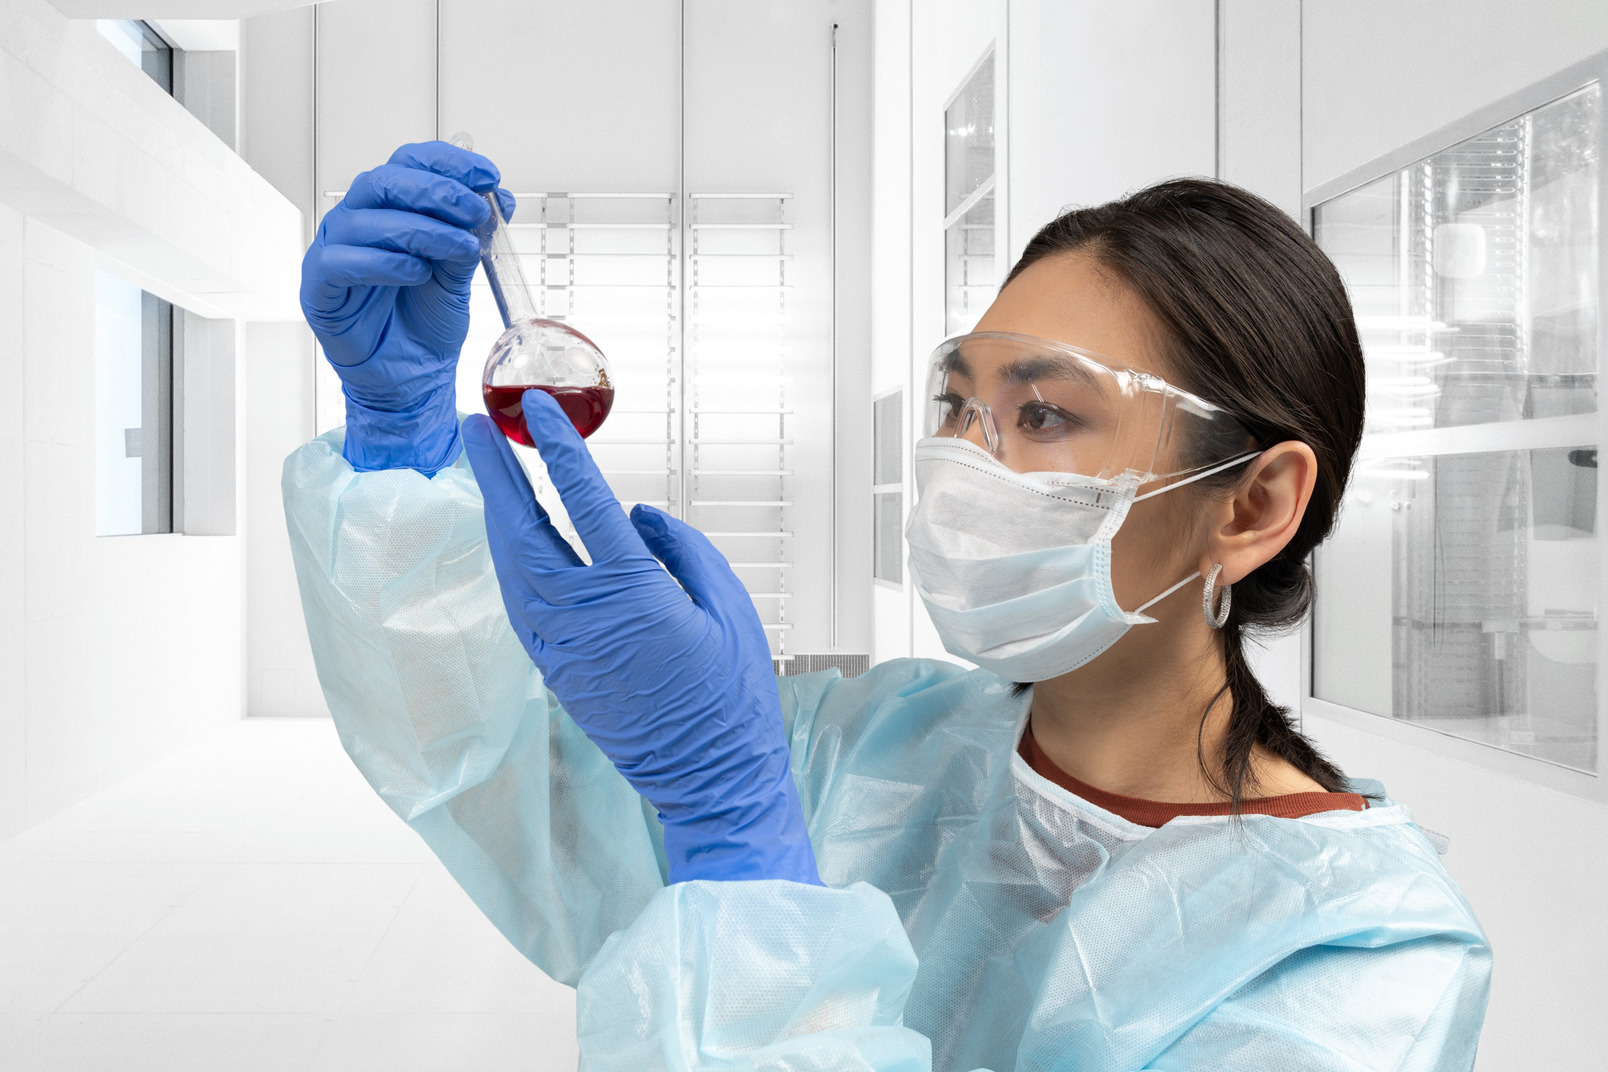 Portrait of a female scientist working in a laboratory